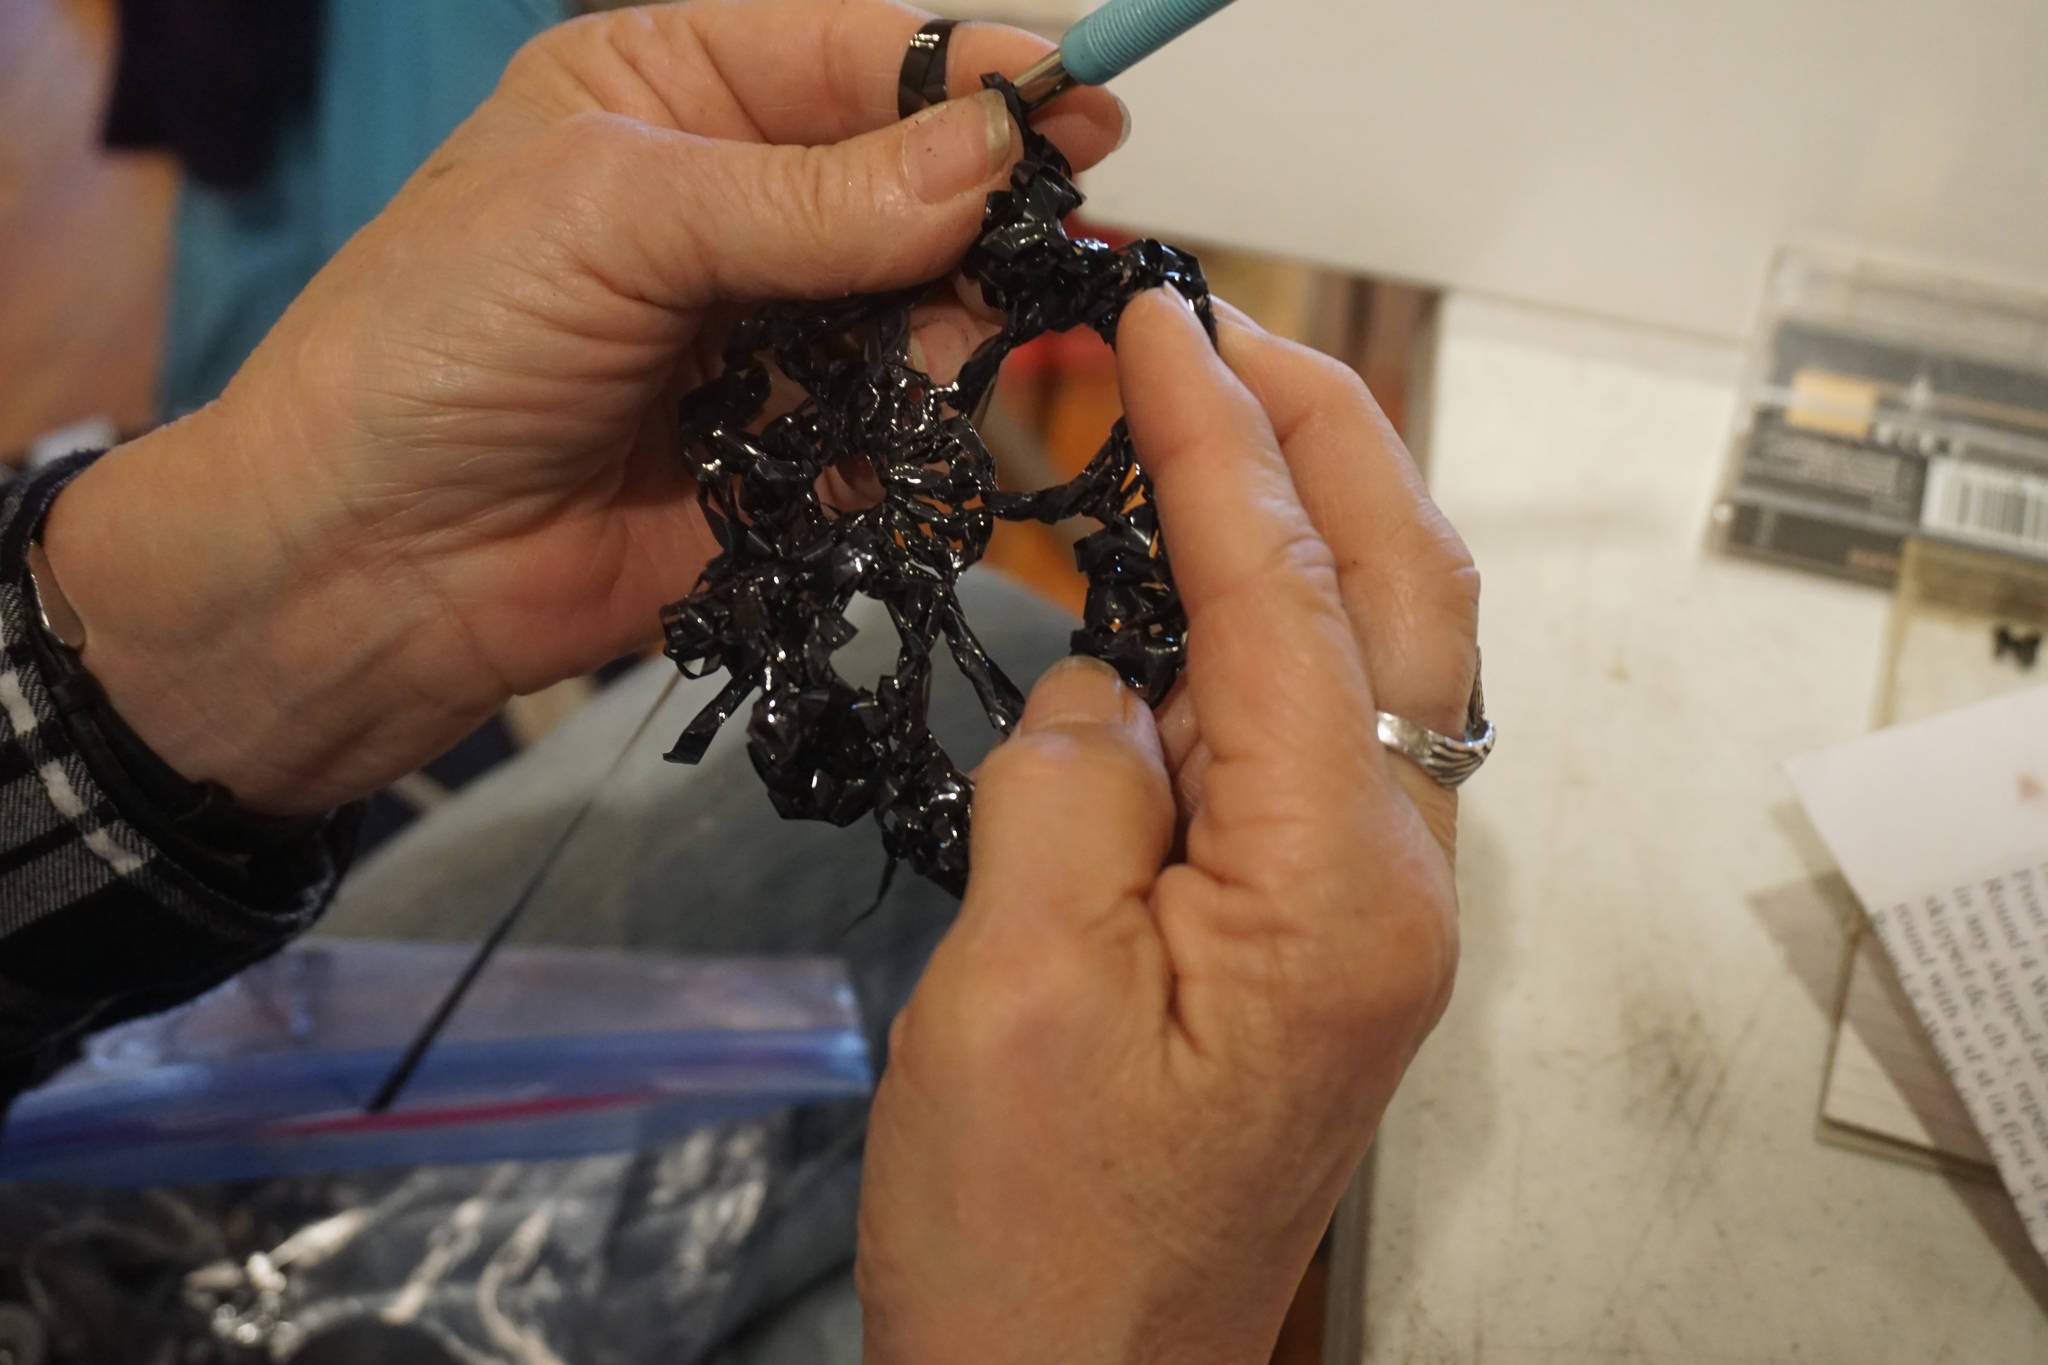 Linda Robinson crochets cassette tape film into flowers for a Wearable Arts piece Saturday, Oct. 14, 2017 at a workshop with Sheila Wyne at Bunnell Street Arts Center in Homer, Alaska. (Photo by Michael Armstrong)